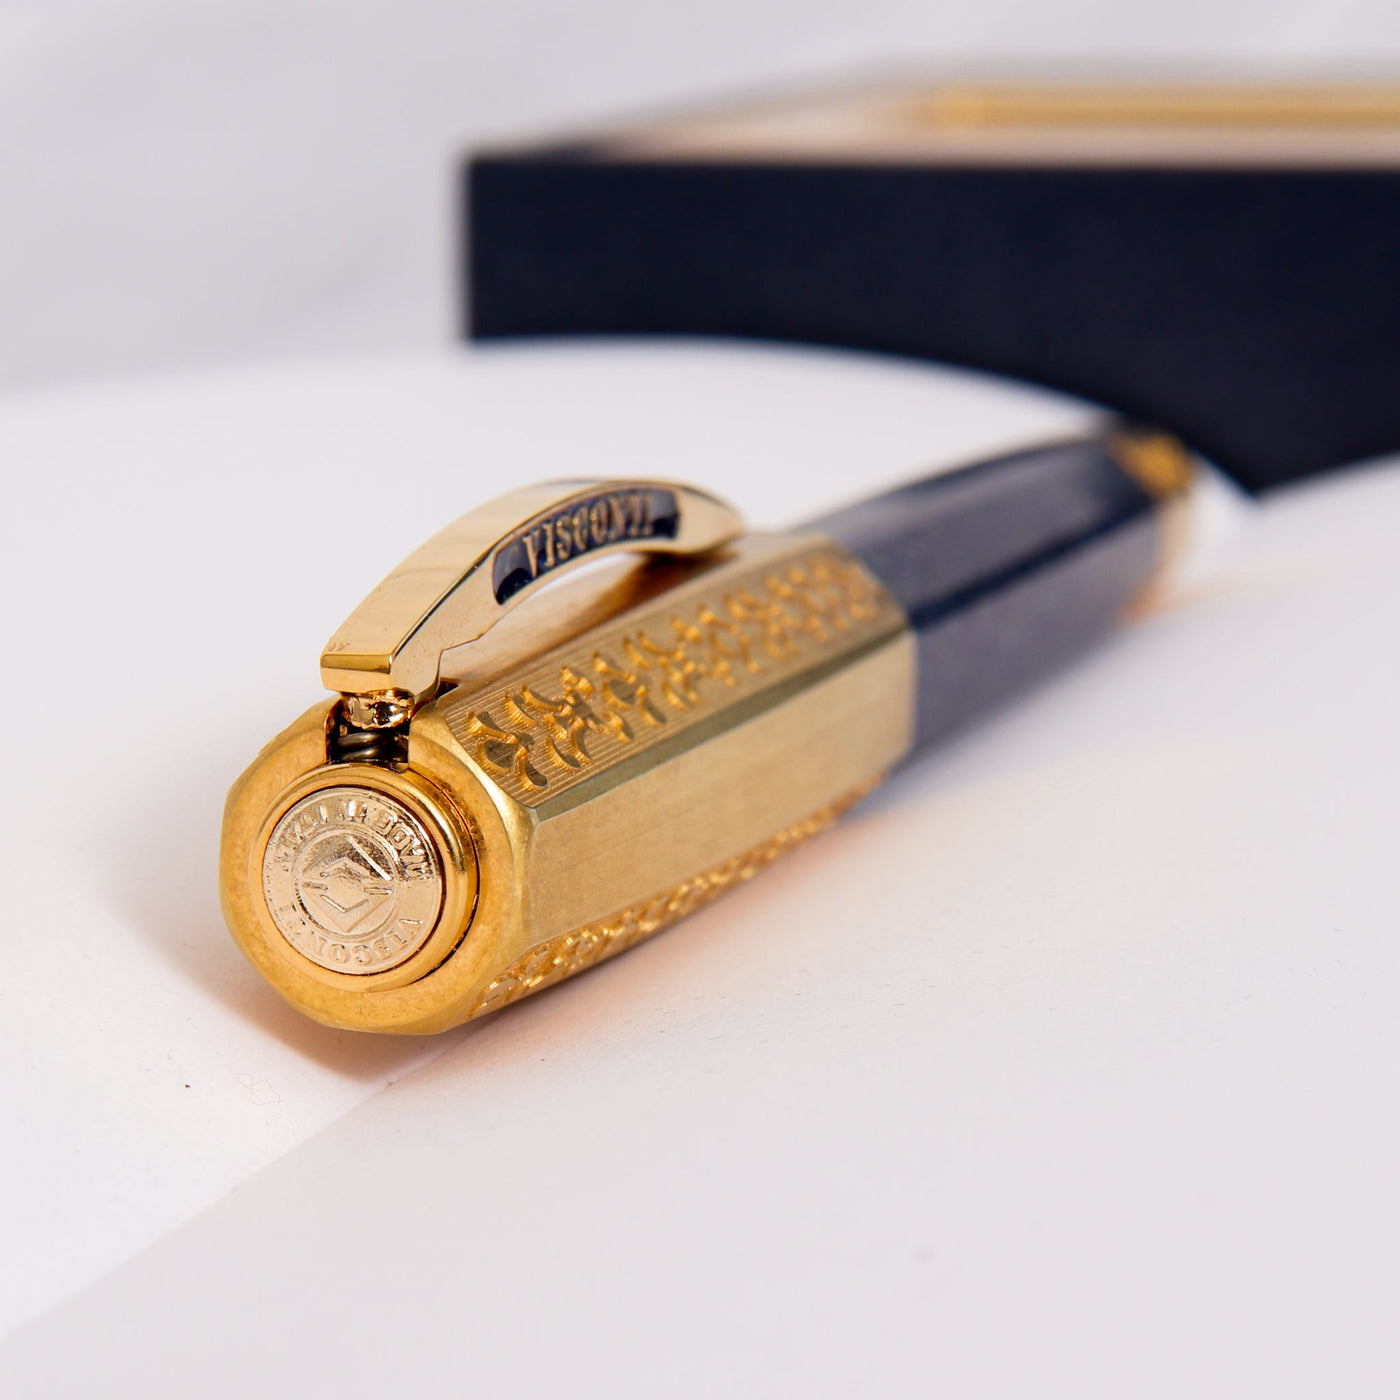 Visconti-Il-Magnifico-Lapis-Lazuli-Fountain-Pen-Enriched-With-The-Ancient-Coat-Of-Arms-Of-The-Medici-Family